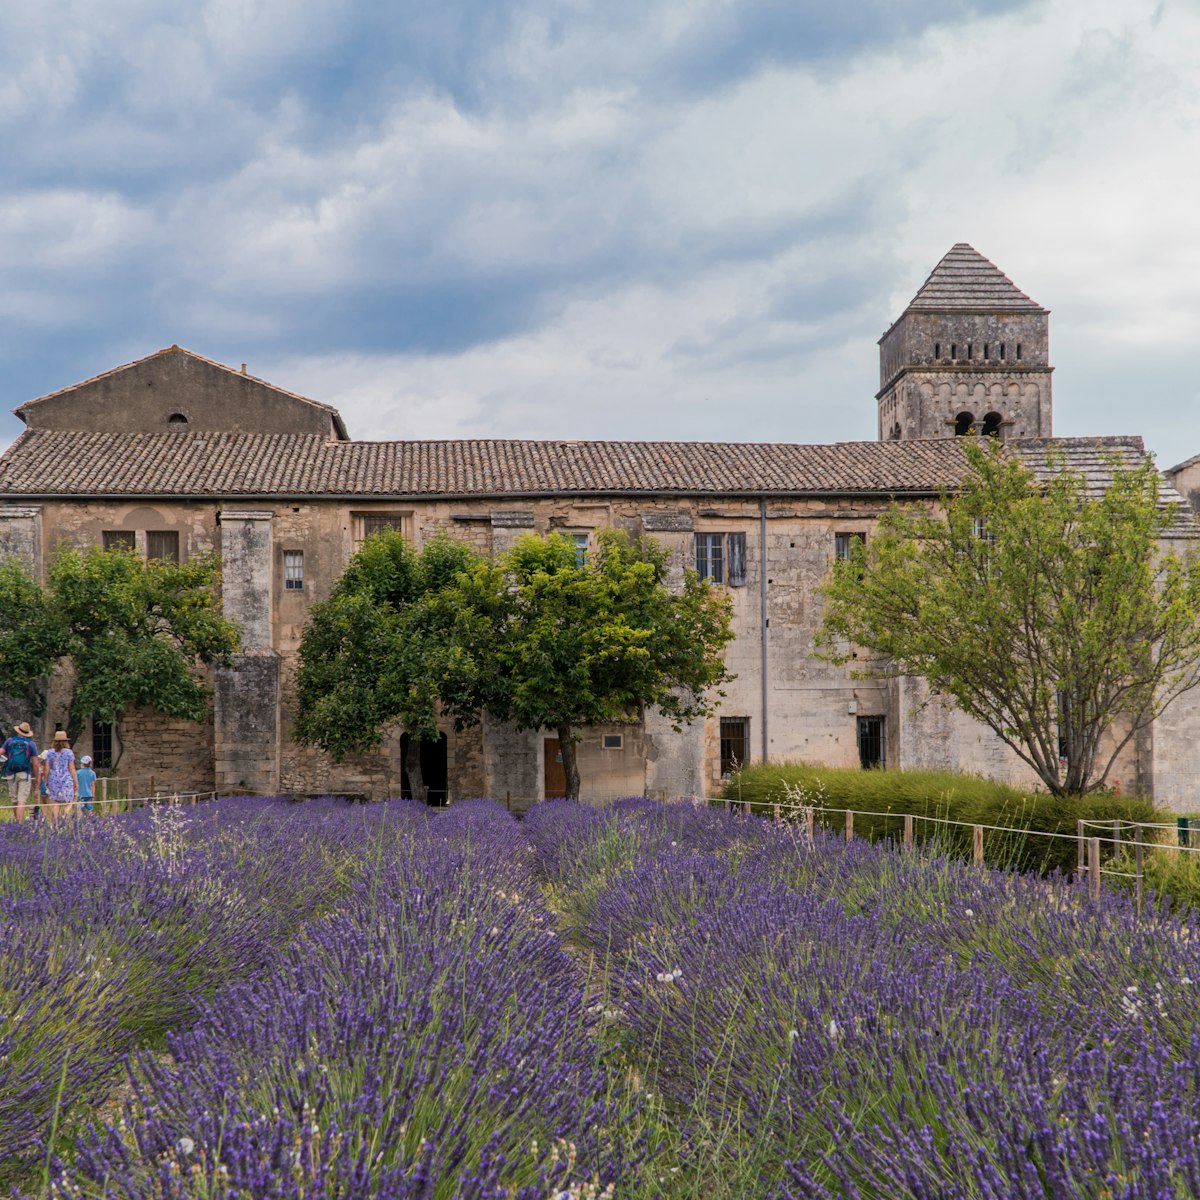 Saint-RÃ©my-de-Provence, Provence-Alpes-CÃ´te d'Azur - France - July 10 2021: Lavender fields at the Monastery of Saint-Paul de Mausole, Saint-RÃ©my.
Saint-Rémy-de-Provence, Provence-Alpes-Côte d'Azur - France - July 10 2021: Lavender fields at the Monastery of Saint-Paul de Mausole, Saint-Rémy.
1369605560
abbey, aroma, building, country, countryside, culture, field, floral, fragrance, french, historical, landmark, landscape, lavender, lavender fields, provence, relax, rock, ruin, rural, scenic, stone, traditional, typical, view, violet